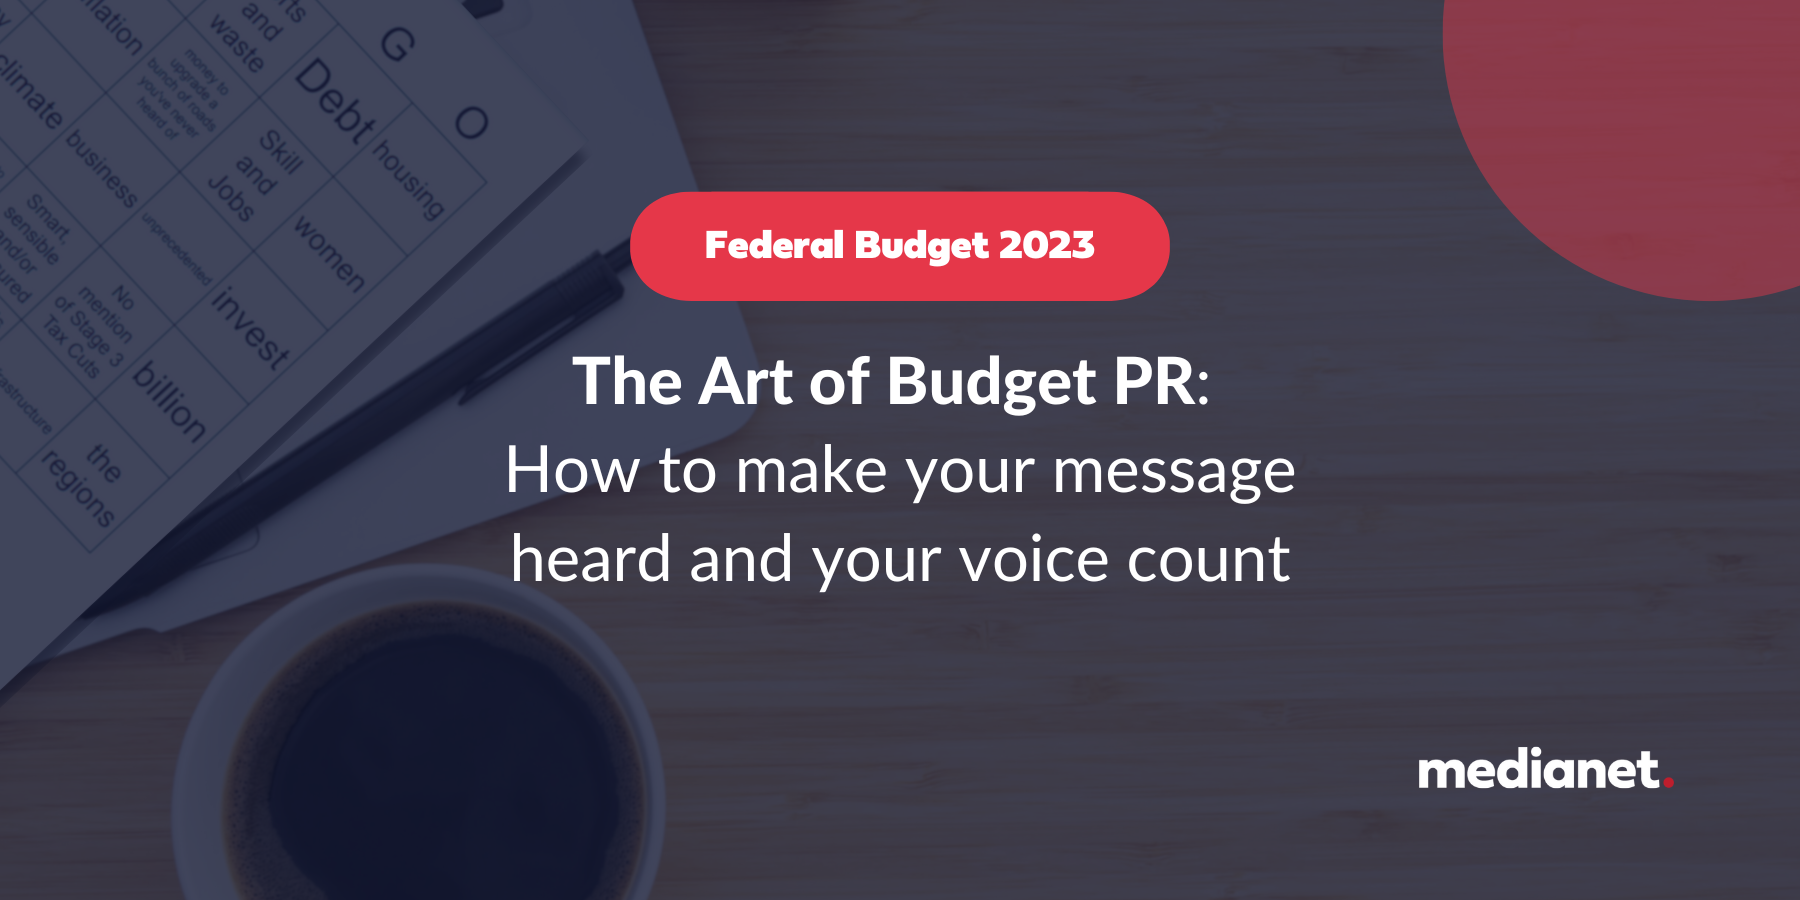 The Art of Budget PR: How to make your message heard and your voice count